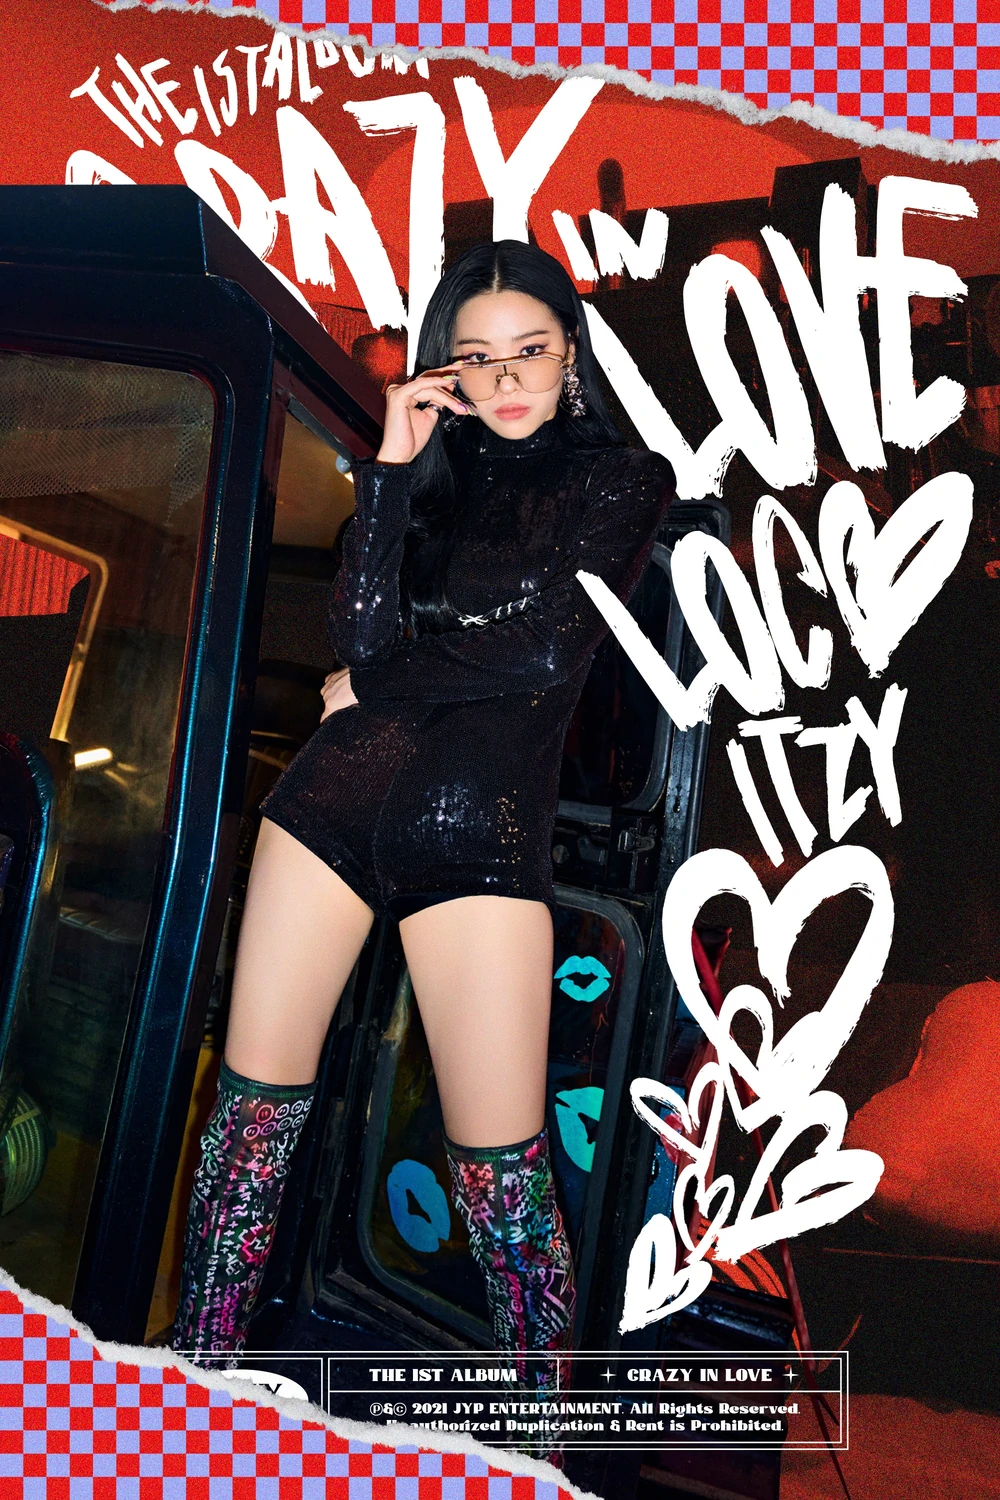 Itzy Crazy In Love Ryujin Concept Teaser Picture Image Photo Kpop K-Concept 1